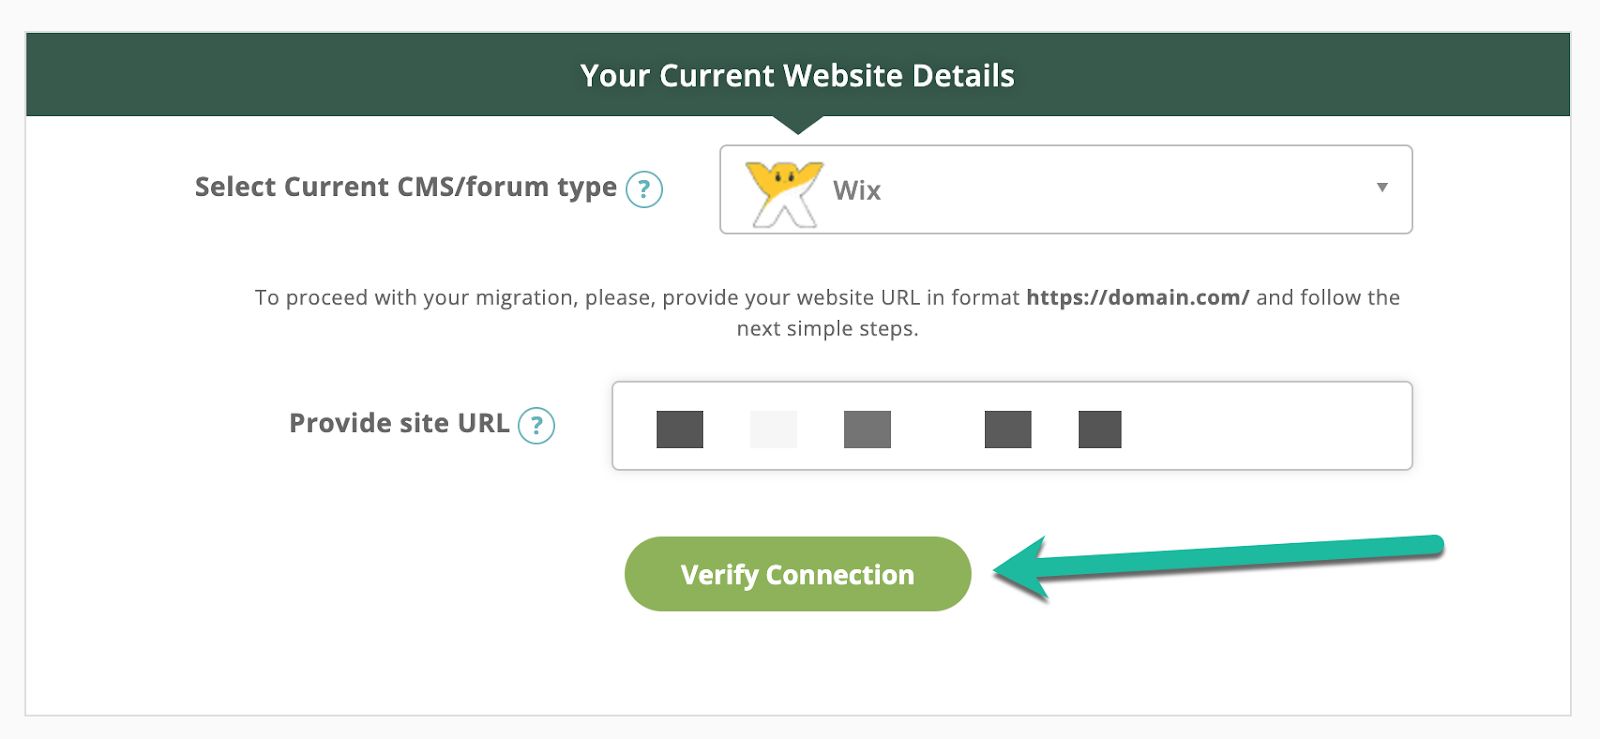 Fill out the form with your free Wix URL and click on the green Verify Connection button.